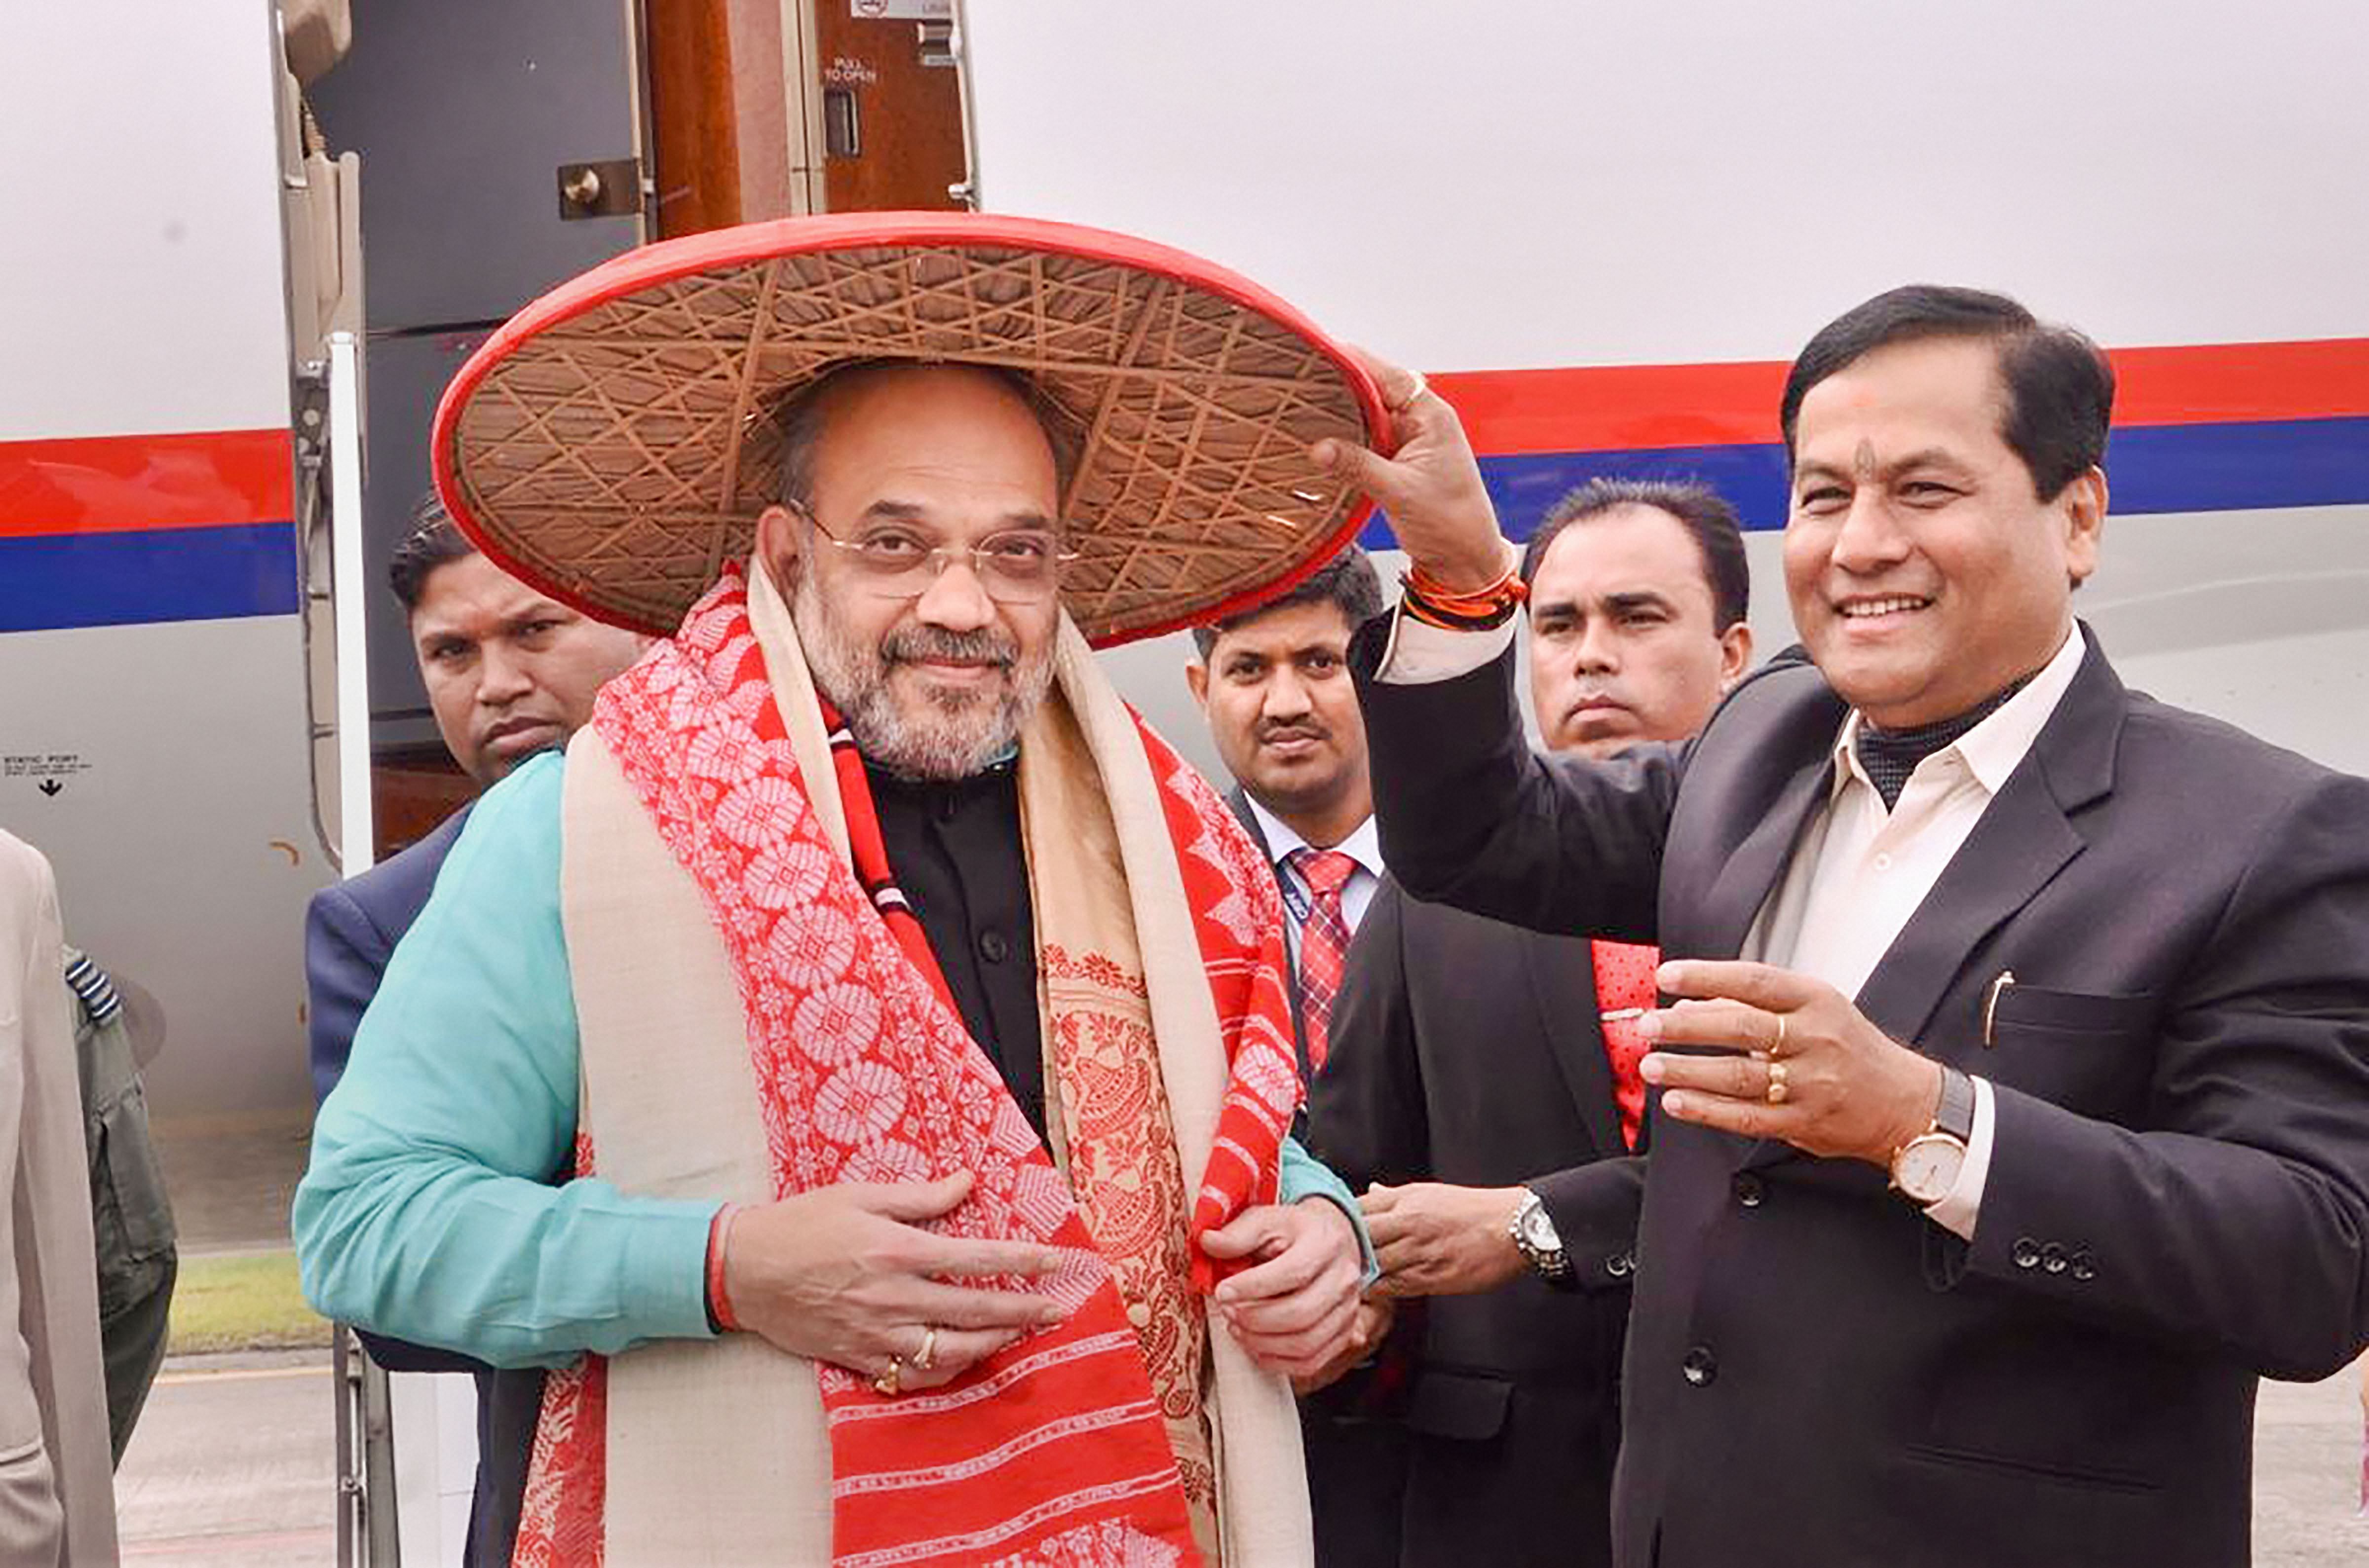  Union Home Minister Amit Shah is greeted by Assam Chief Minister Sarbananda Sonowal at the airport as he arrives to attend the 34th Statehood Day of Arunachal Pradesh, in Lakhimpur Kheri. (Credit: Twitter/@sarbanandsonwal)